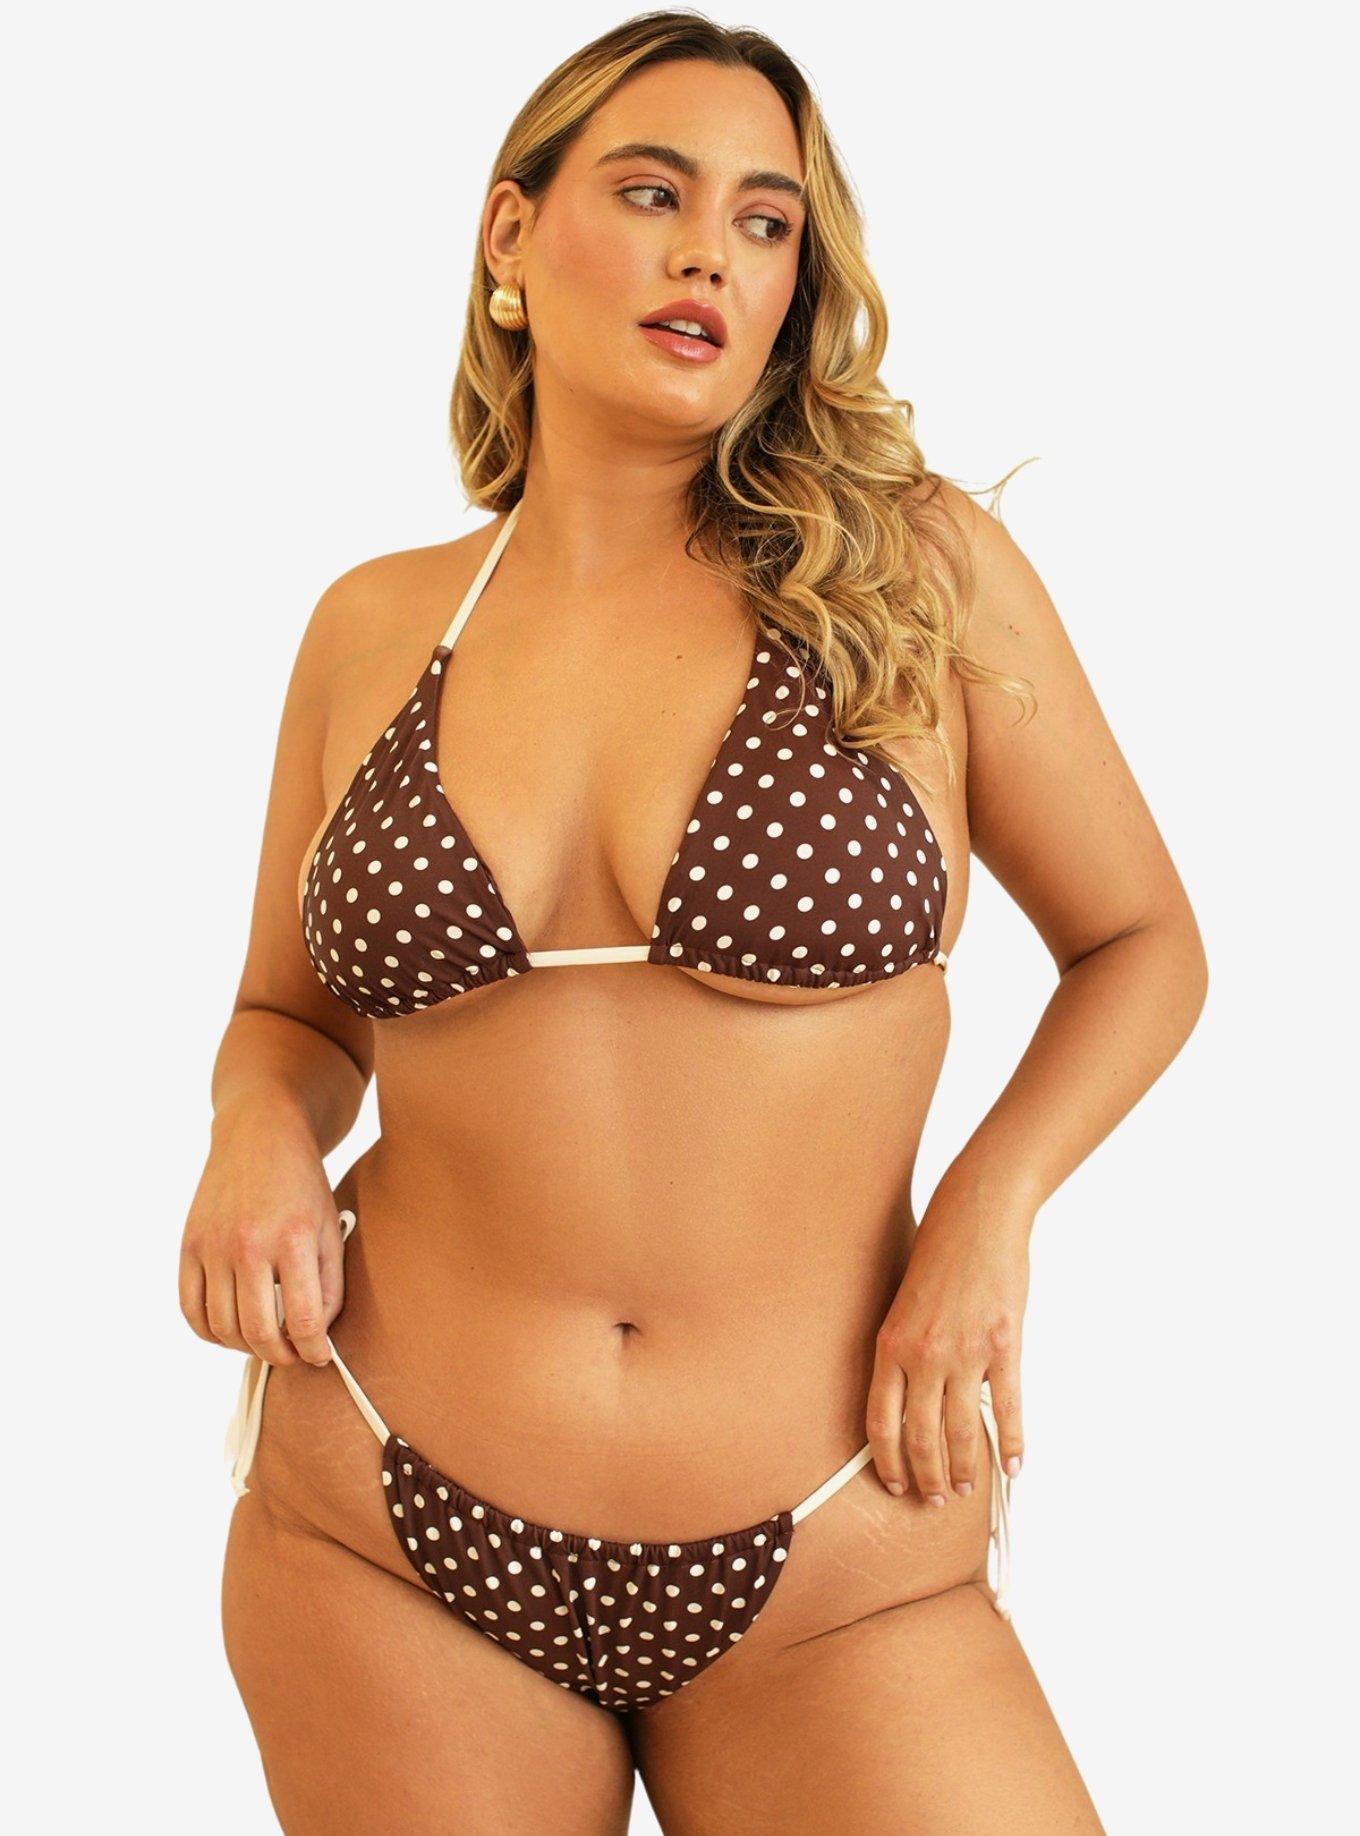 Dippin' Daisy's Paris Cheeky Swim Bottom Dotted Brown, BROWN, hi-res